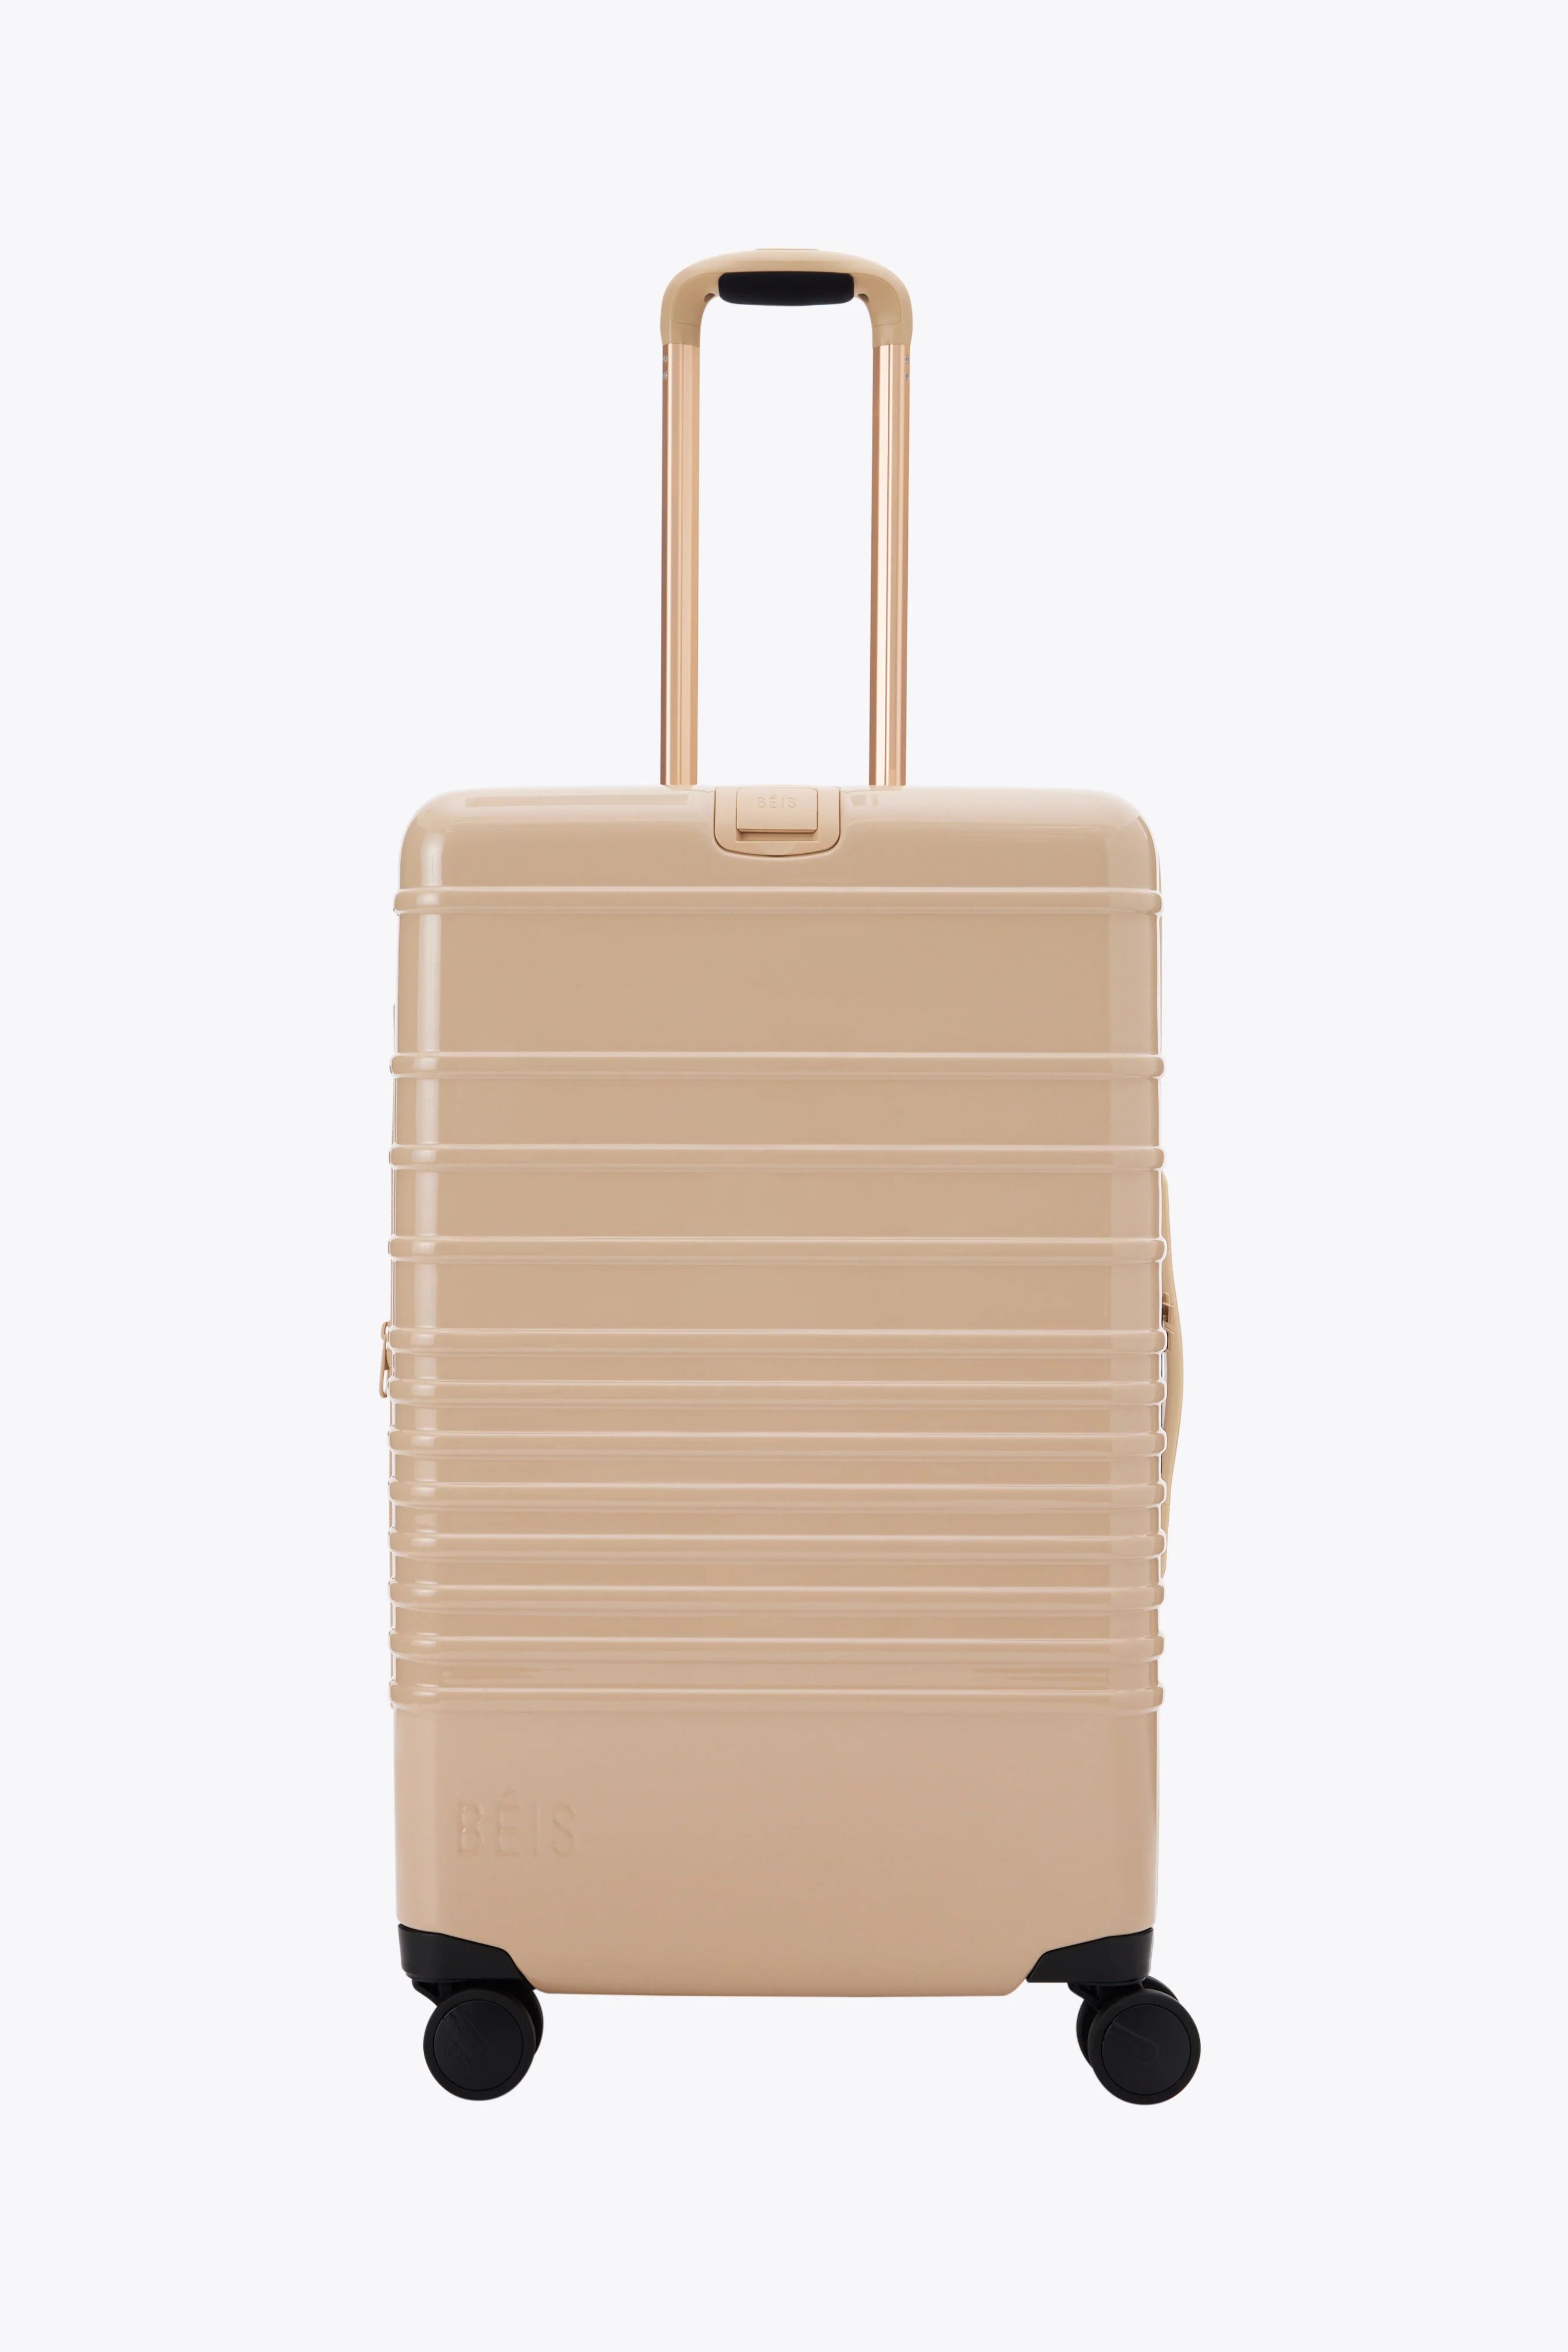 THE MEDIUM CHECK-IN ROLLER IN GLOSSY BEIGE | BÉIS Travel